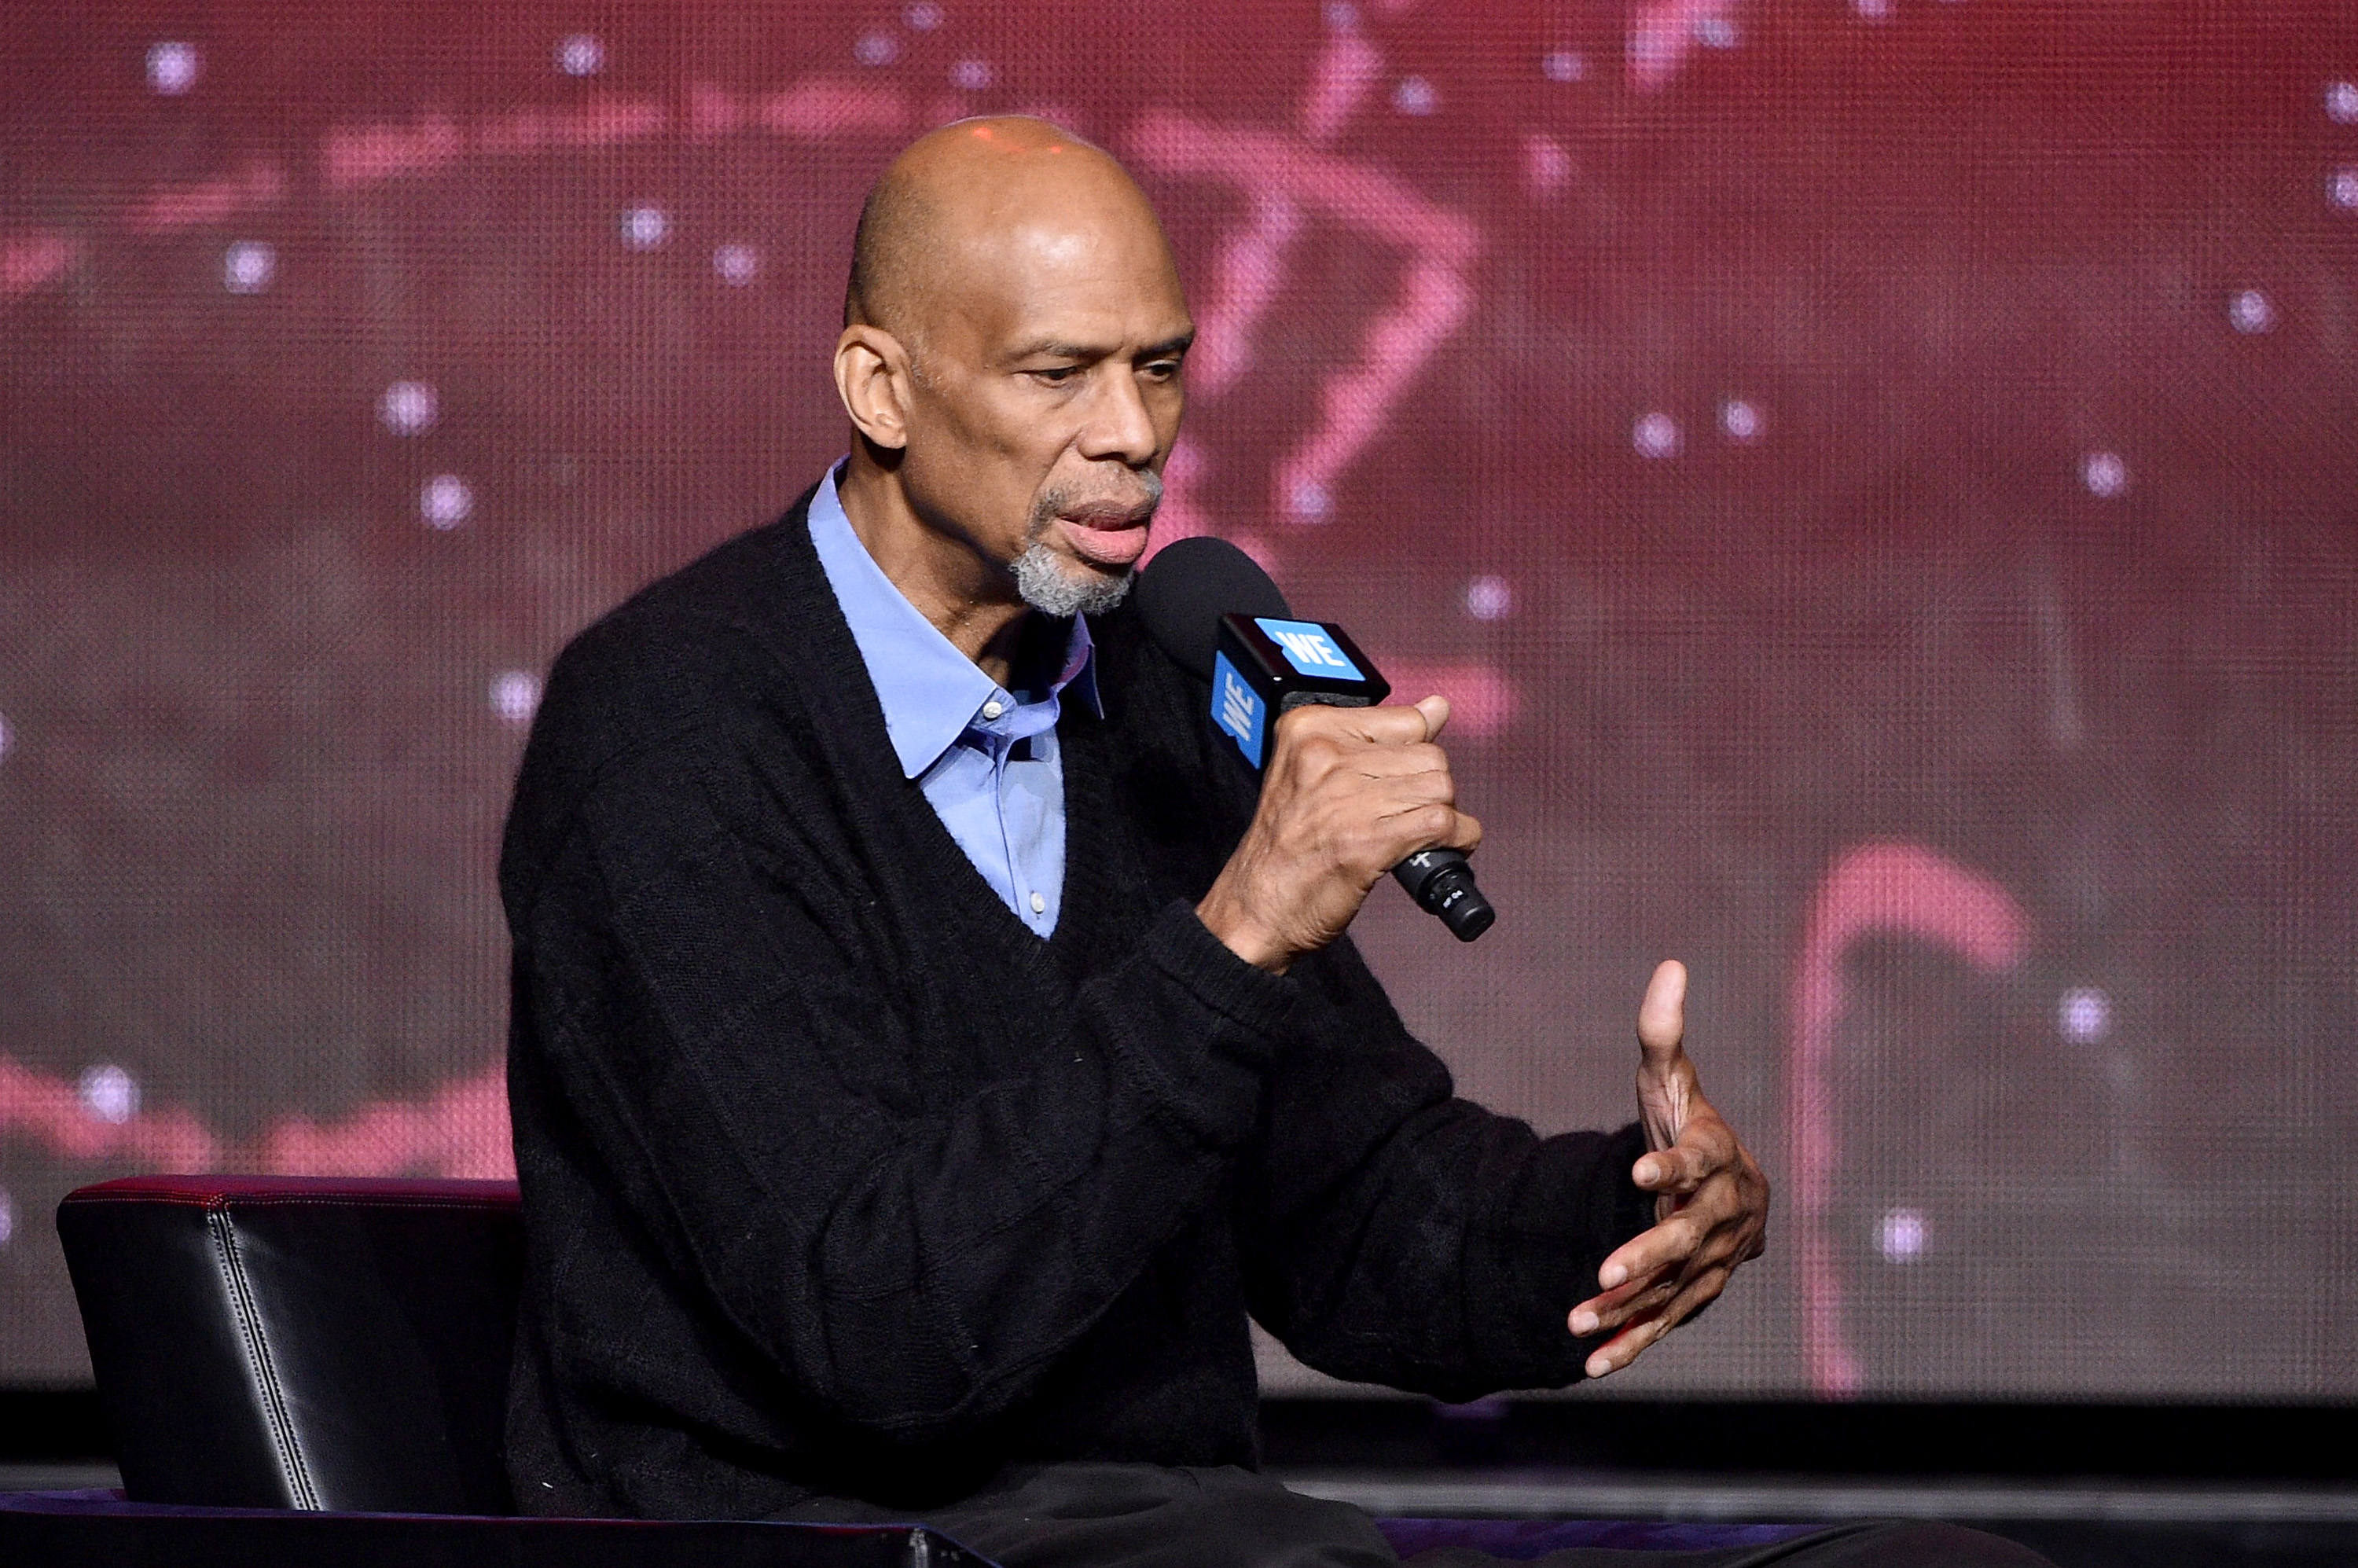 Kareem Abdul-Jabbar defends protests and says racism is deadlier than  Covid-19 in powerful LA Times op-ed